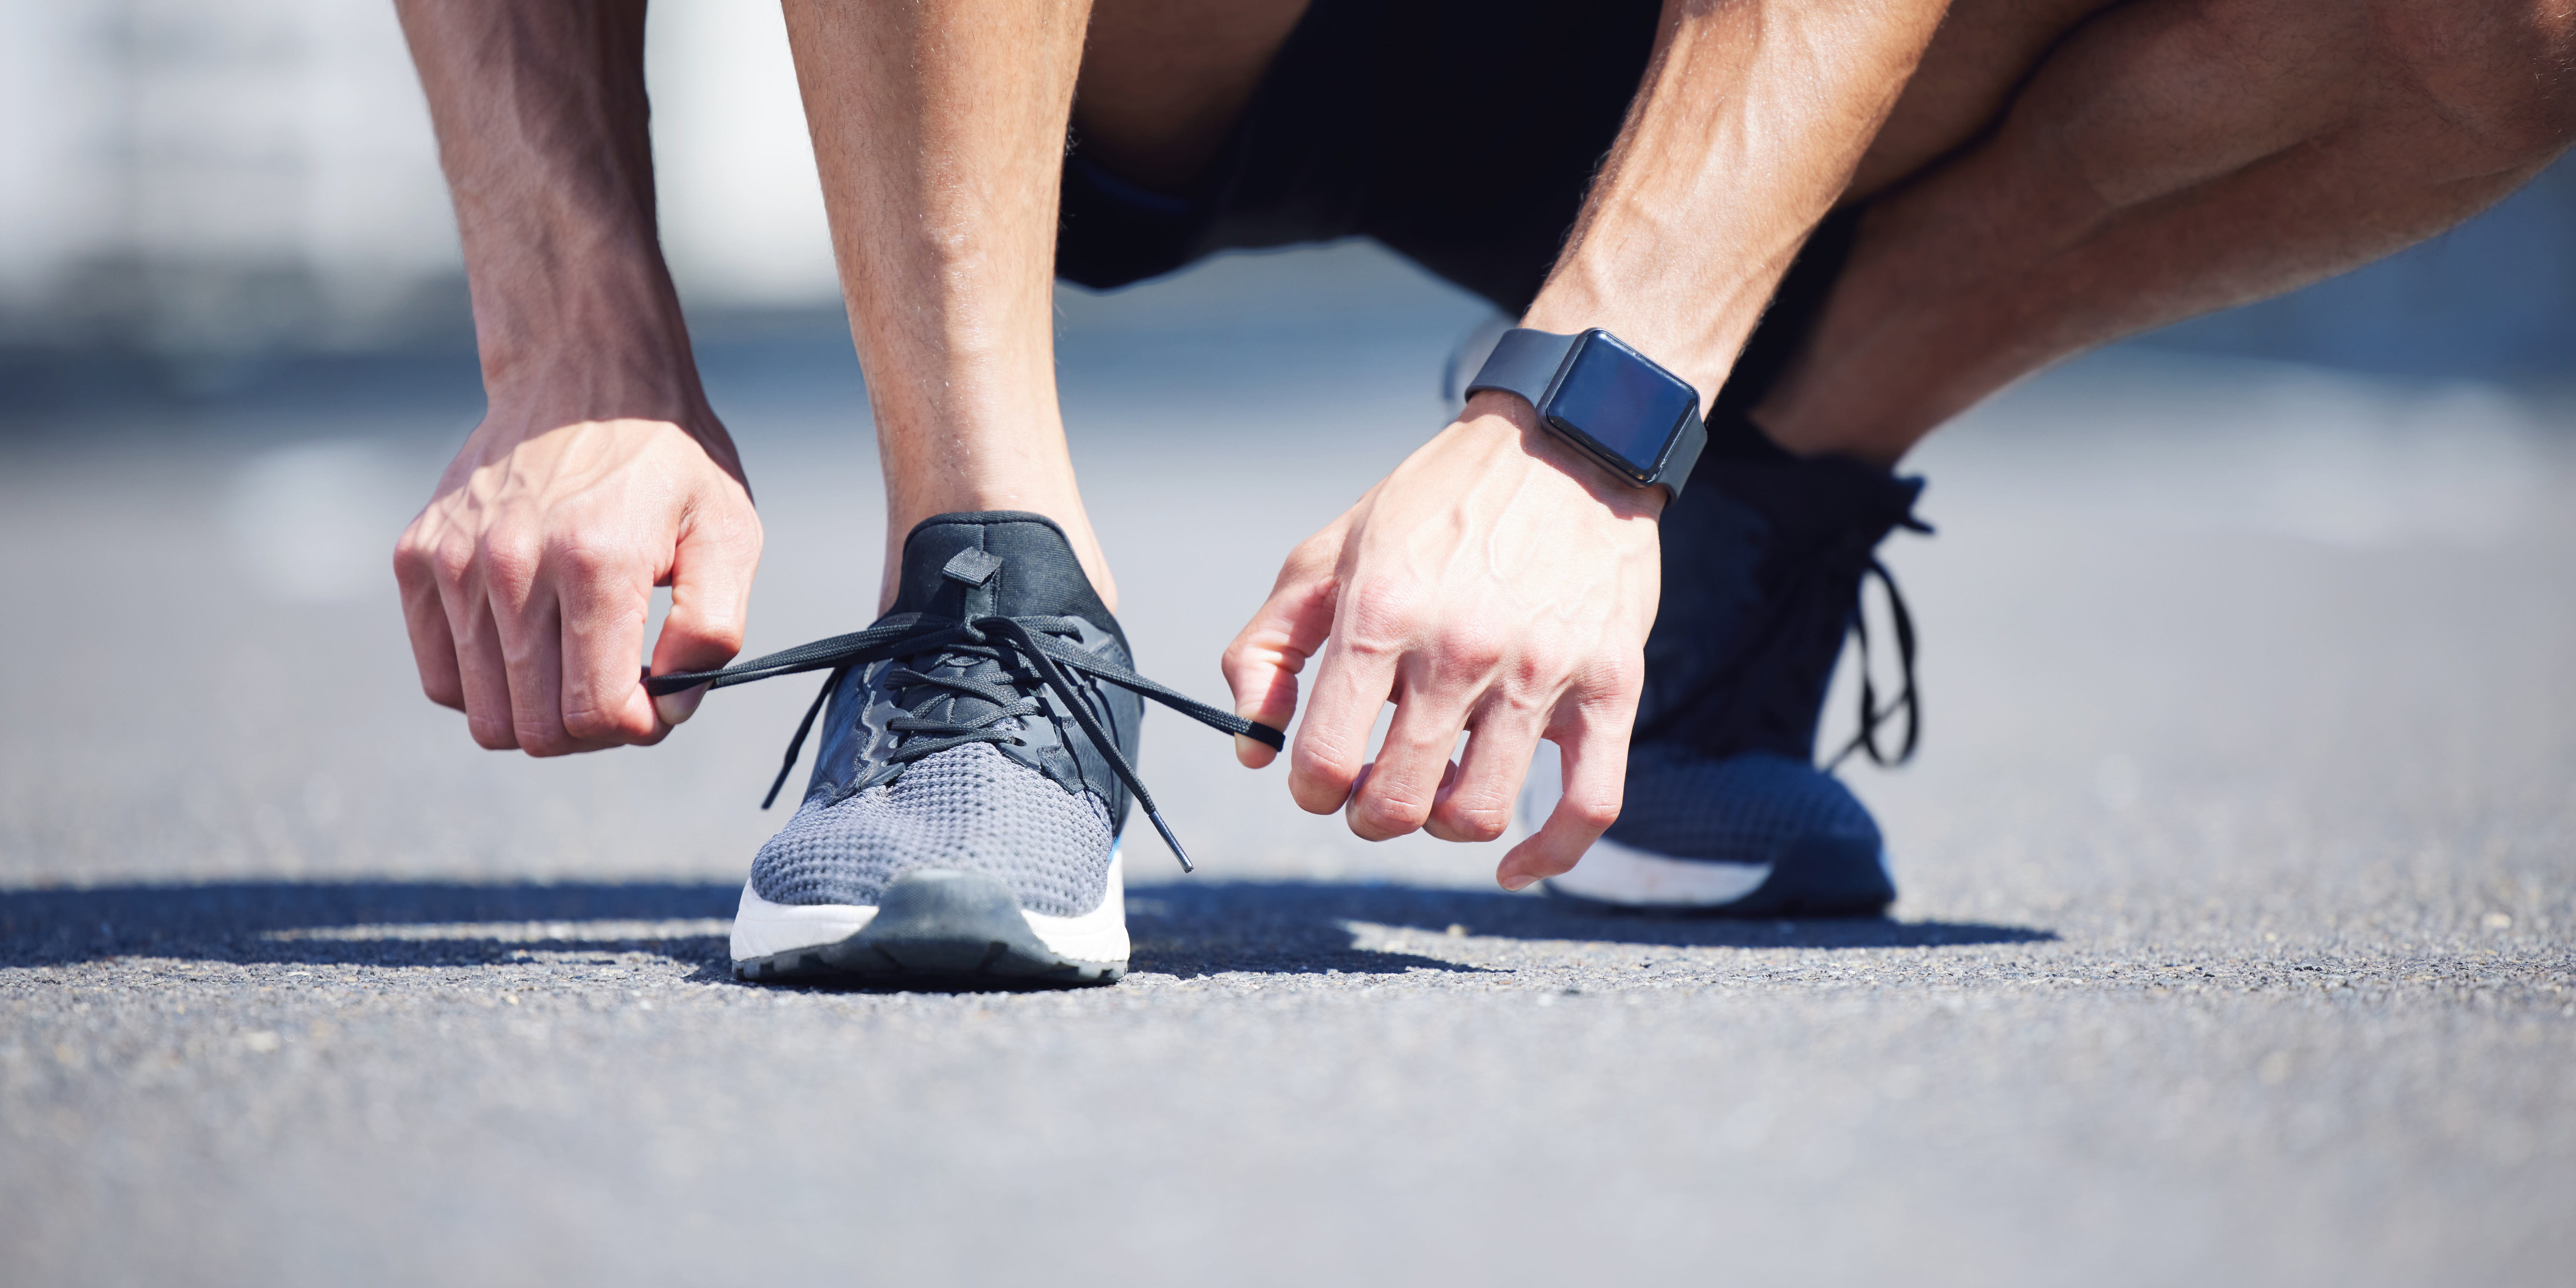 Hands, lace tie or running shoes in city workout, training or marathon exercise for health, wellness or cardio. Zoom, man or sports runner ready for fitness on road or street with digital smart watch